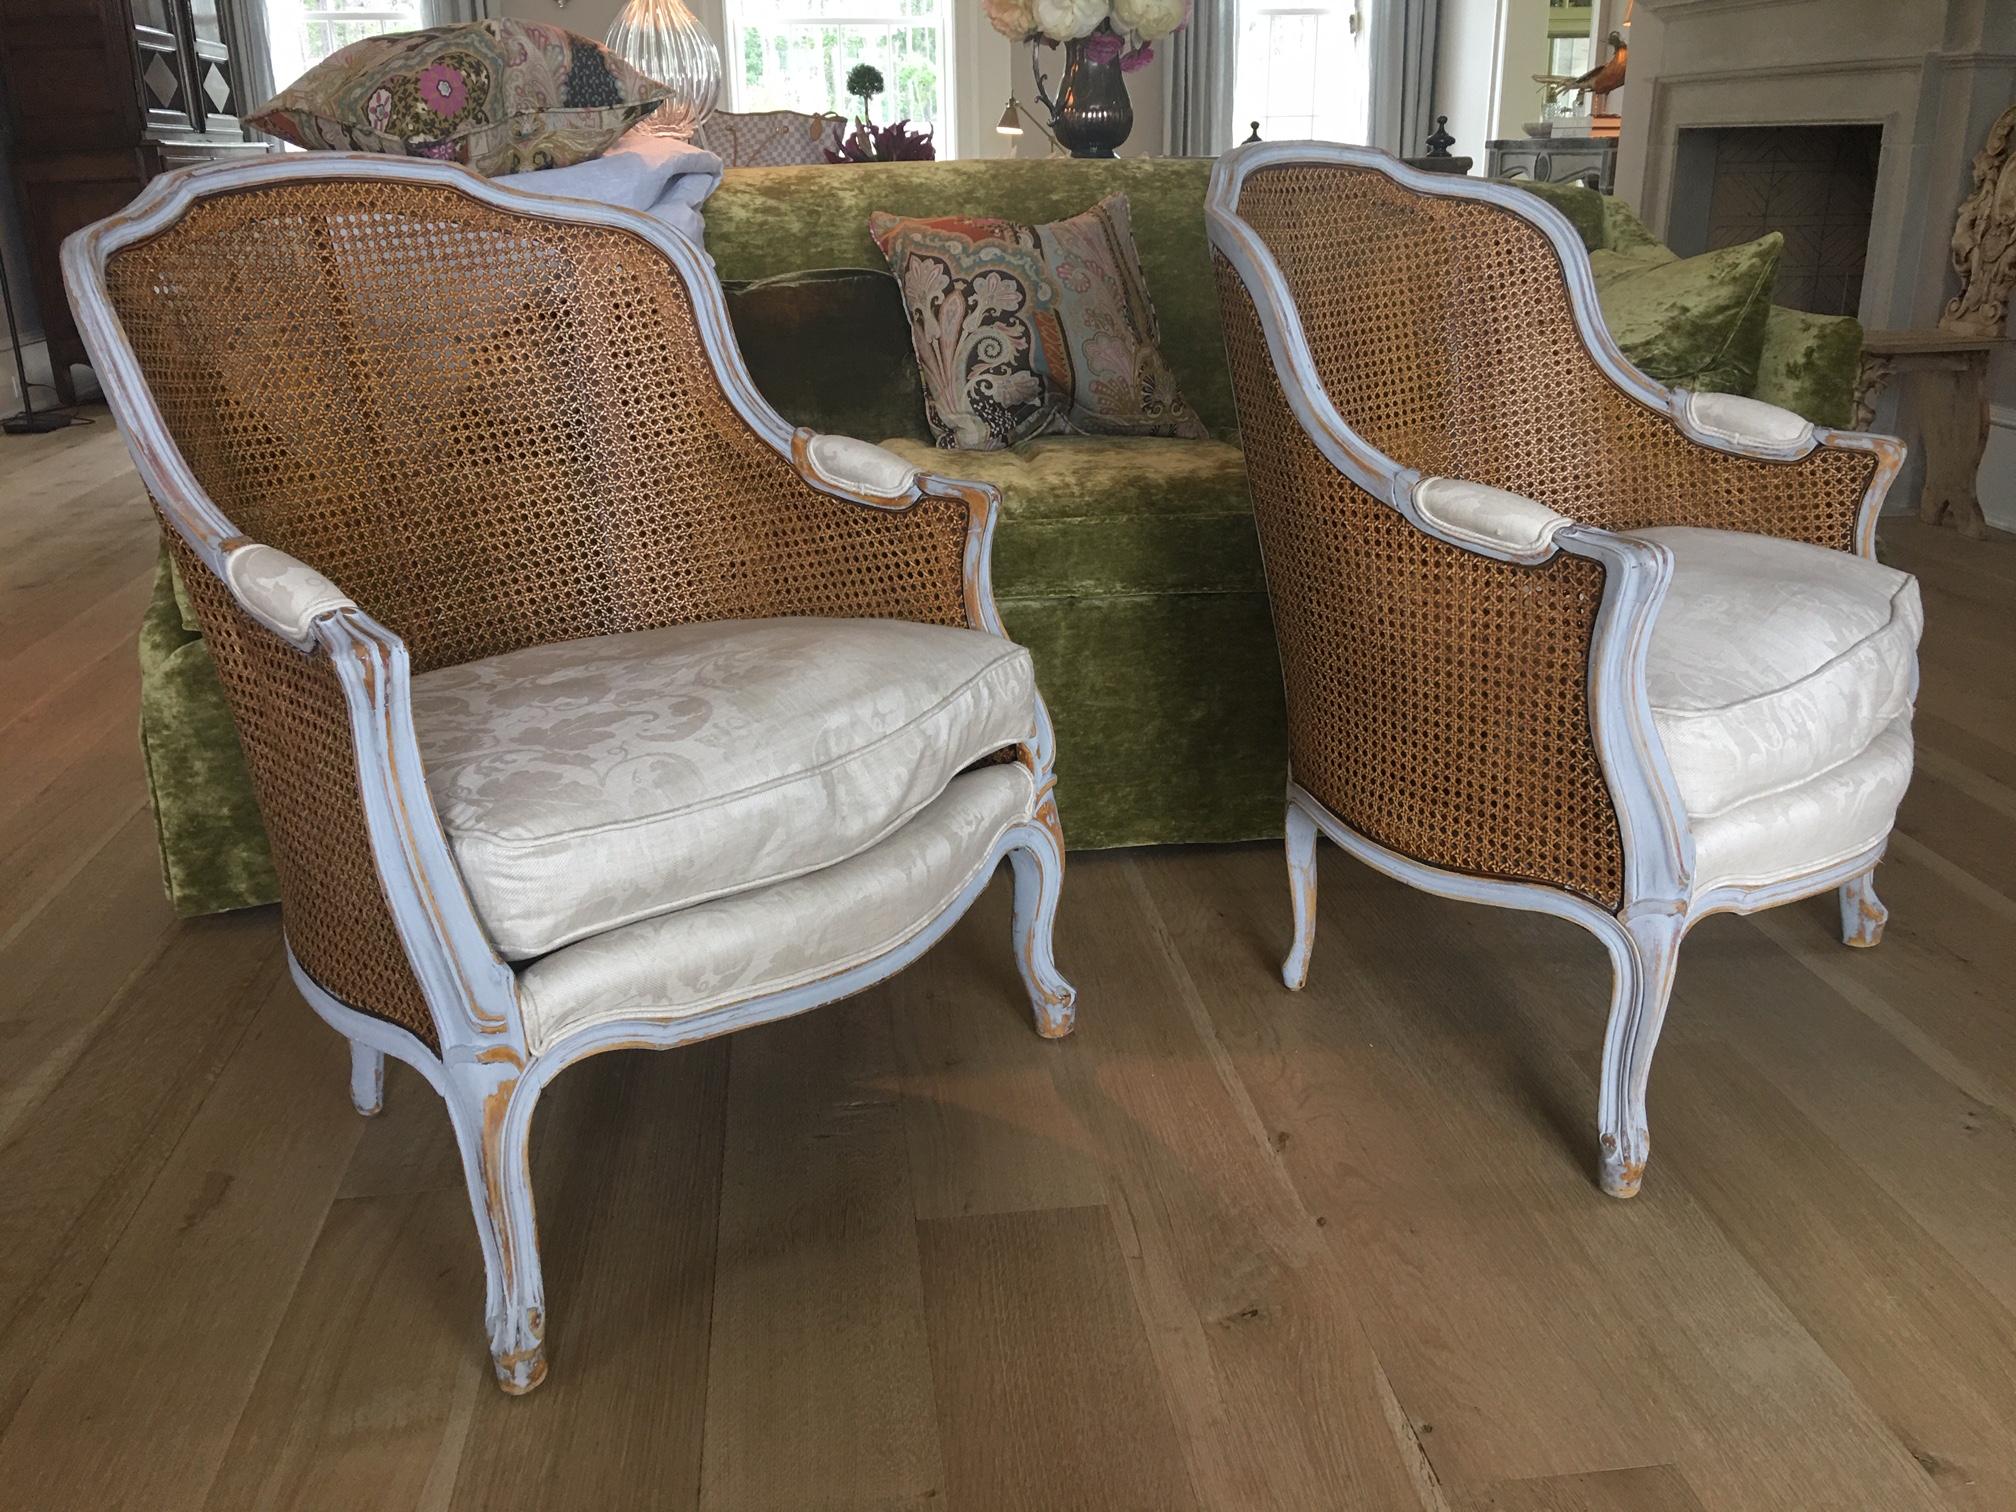 Pair of painted Louis XVI style cane back side chairs, early 20th century.  Side panels are double caned, center back panel is single caned.  Upholstered in cowtan and tout linen. Measures: 30